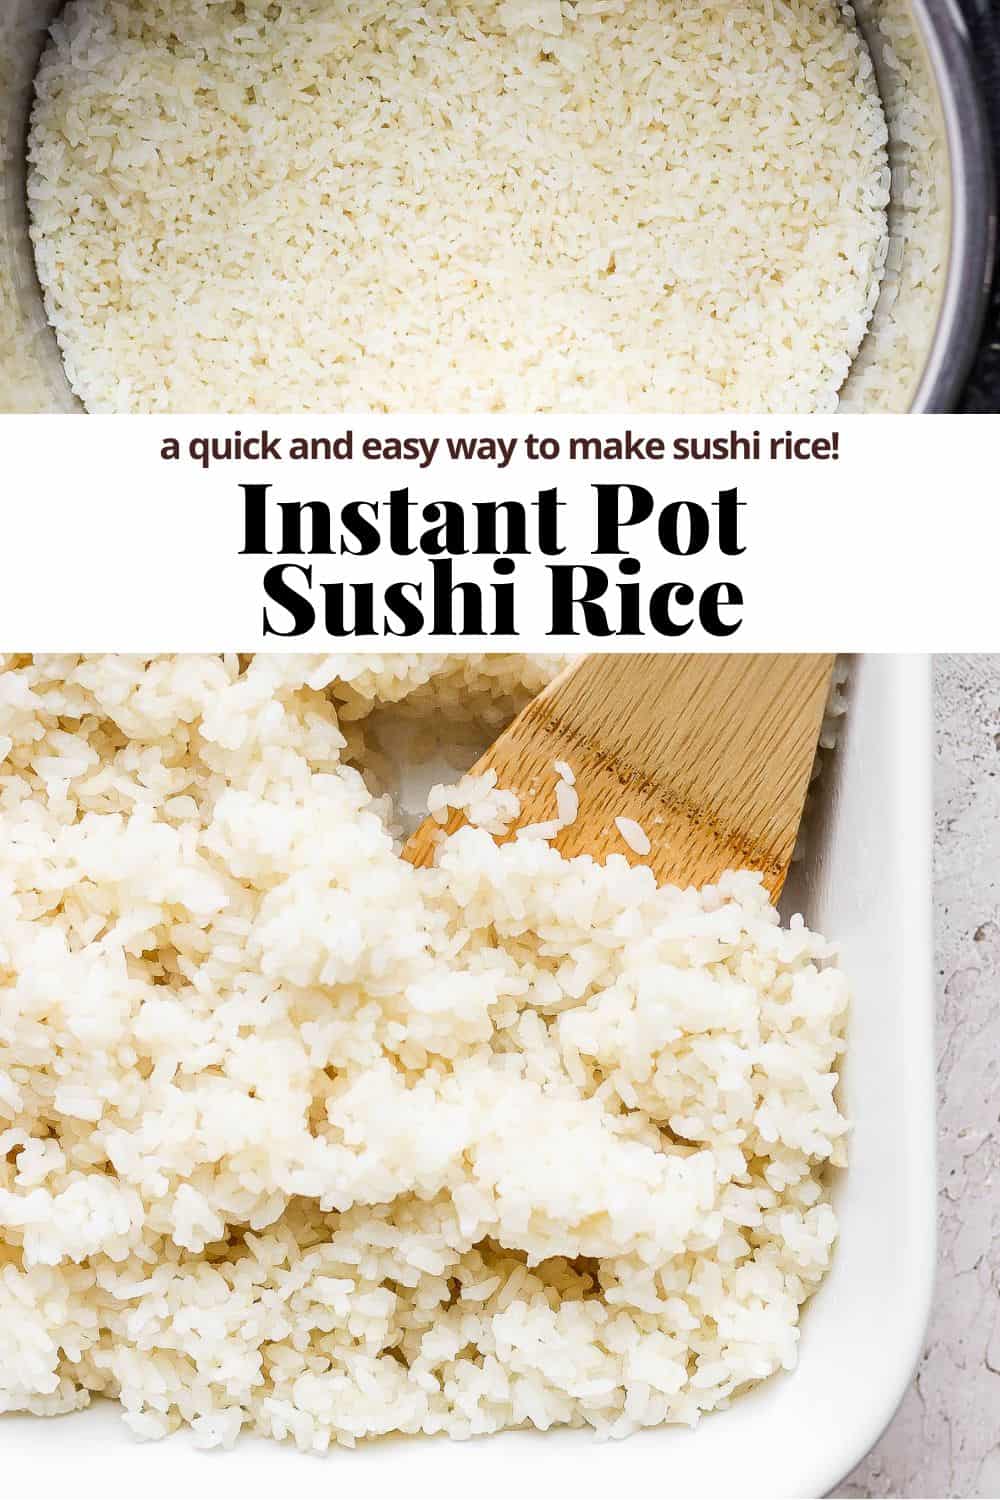 Instant Pot Sushi Rice in 20 Minutes